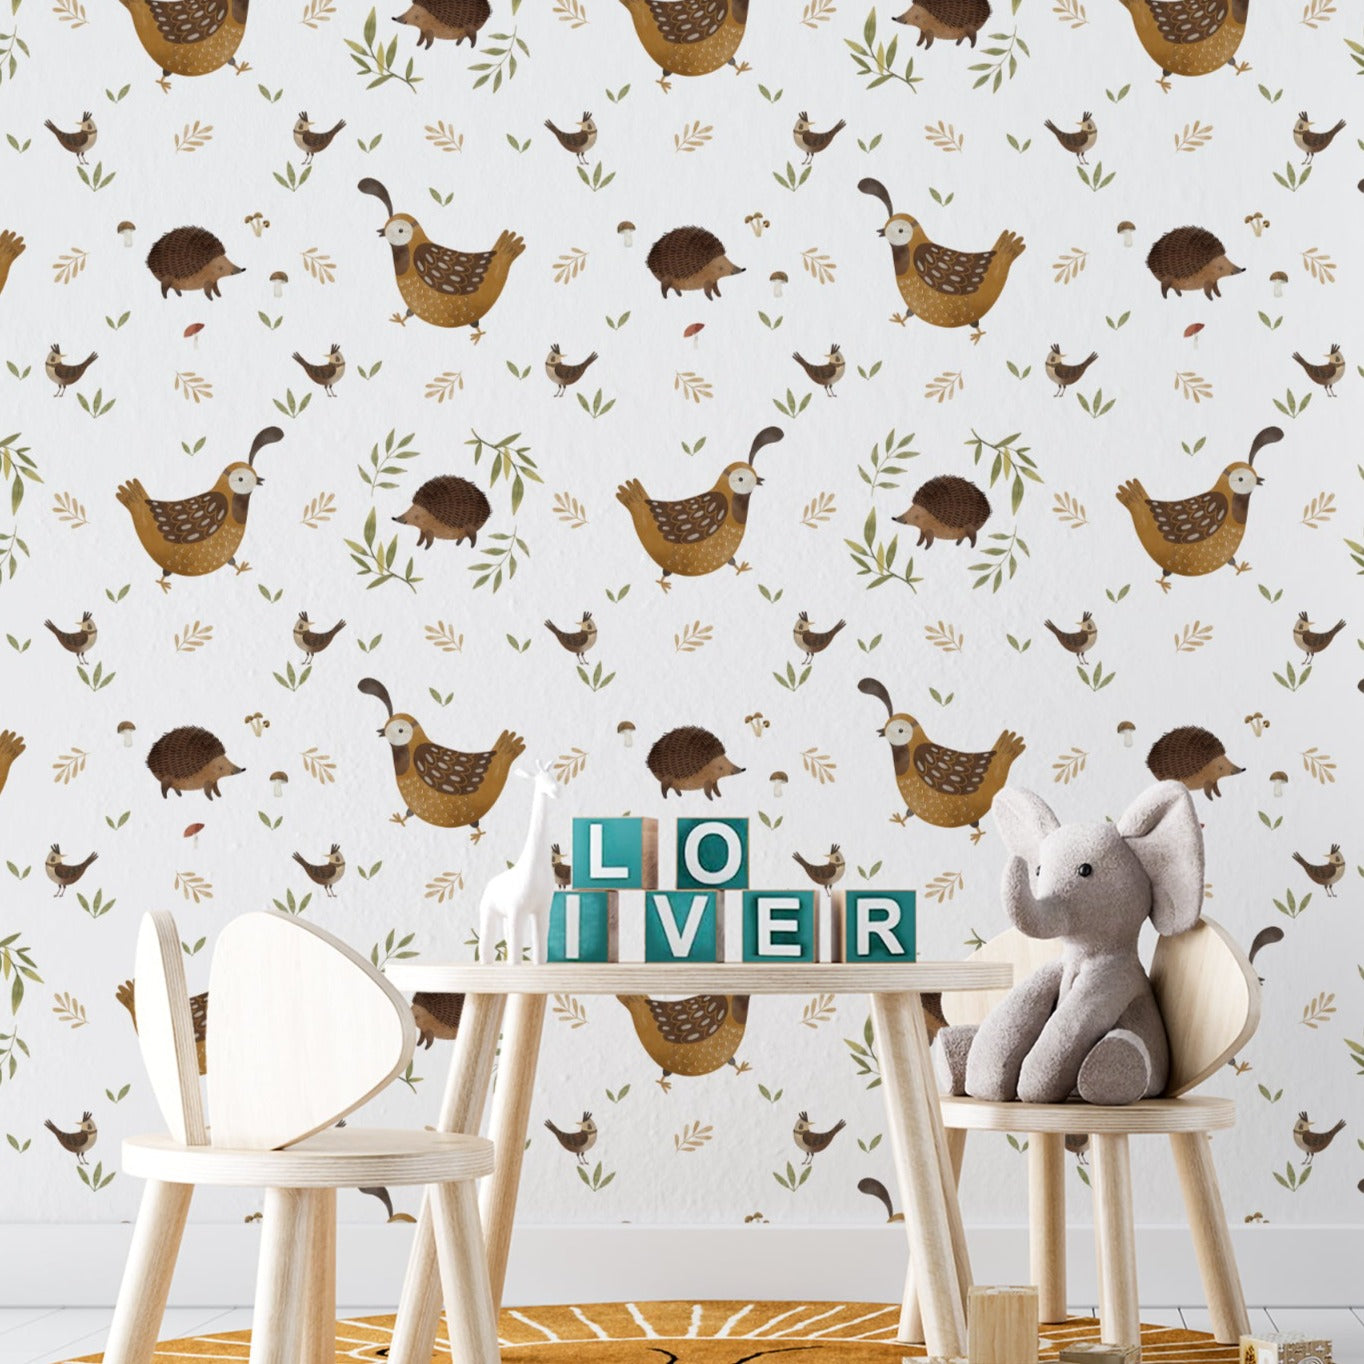 Child-friendly room decorated with Forest Hen Wallpaper, displaying a delightful array of forest creatures like hens, hedgehogs, and birds, creating an inviting and educational environment perfect for stimulating young imaginations.